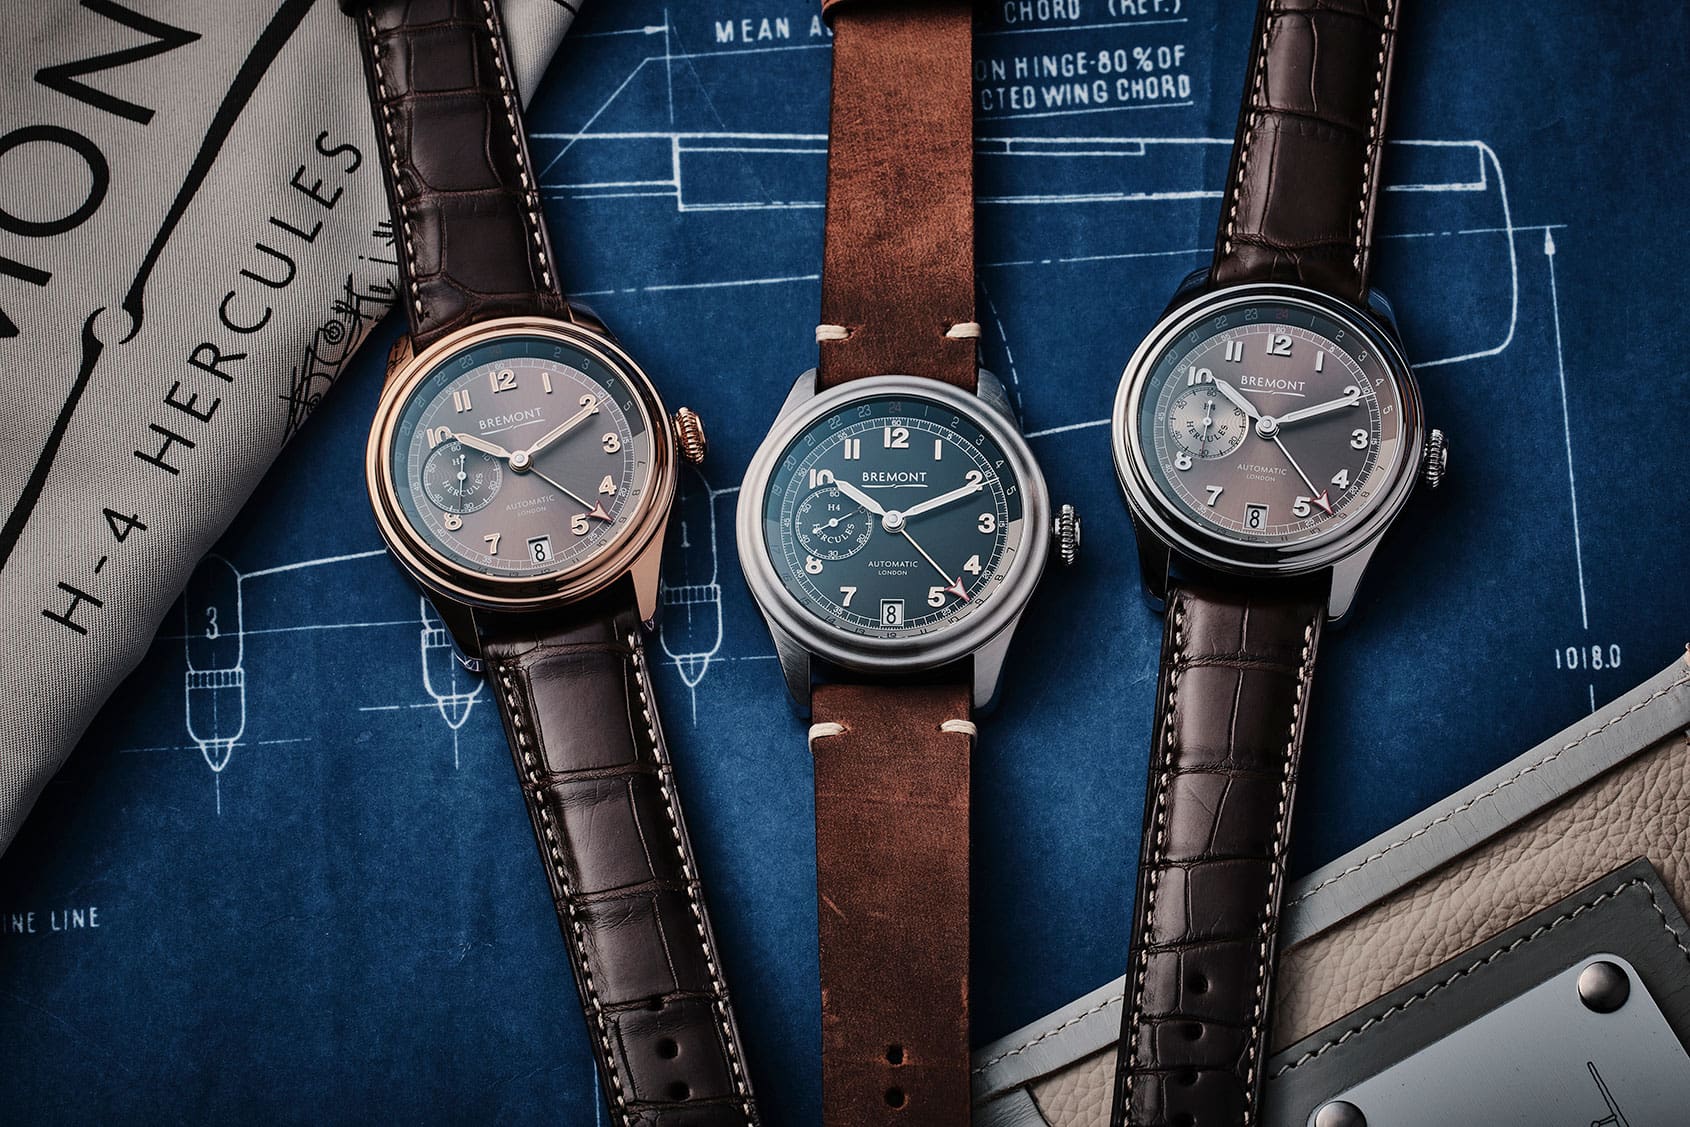 INTRODUCING: The Bremont H-4 Hercules 